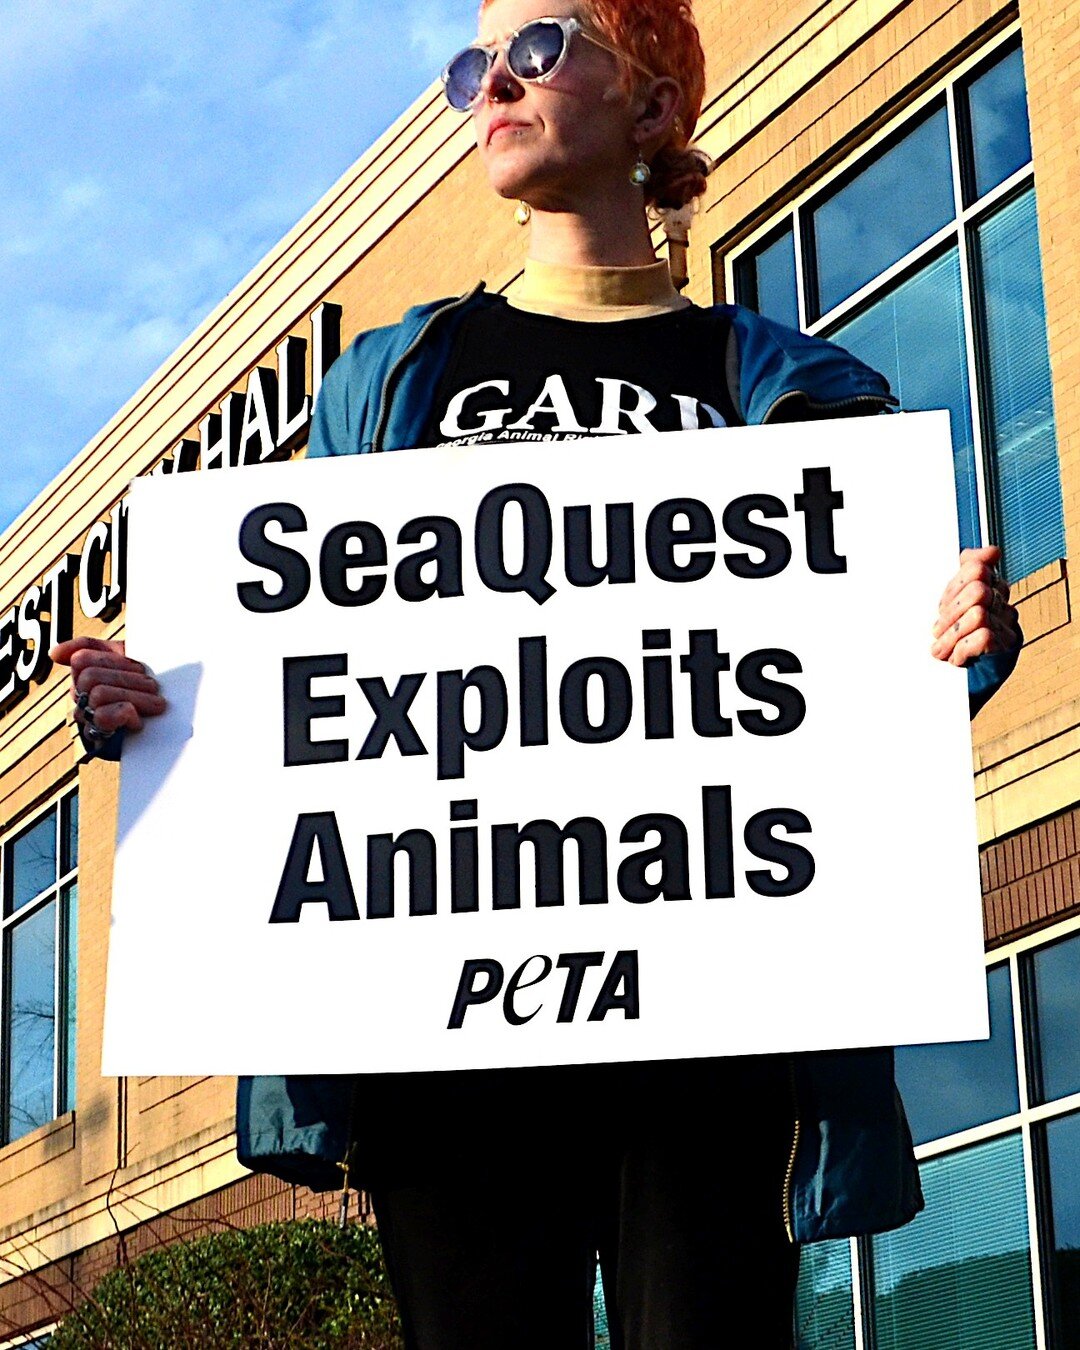 GARP protest at Stonecrest City Hall. SeaQuest at Stonecrest Mall in Dekalb County has been operating illegally since opening in Nov. 2021 because the property is NOT ZONED TO HOUSE INDOOR ANIMAL EXHIBITS. And now, the City of Stonecrest is actually 